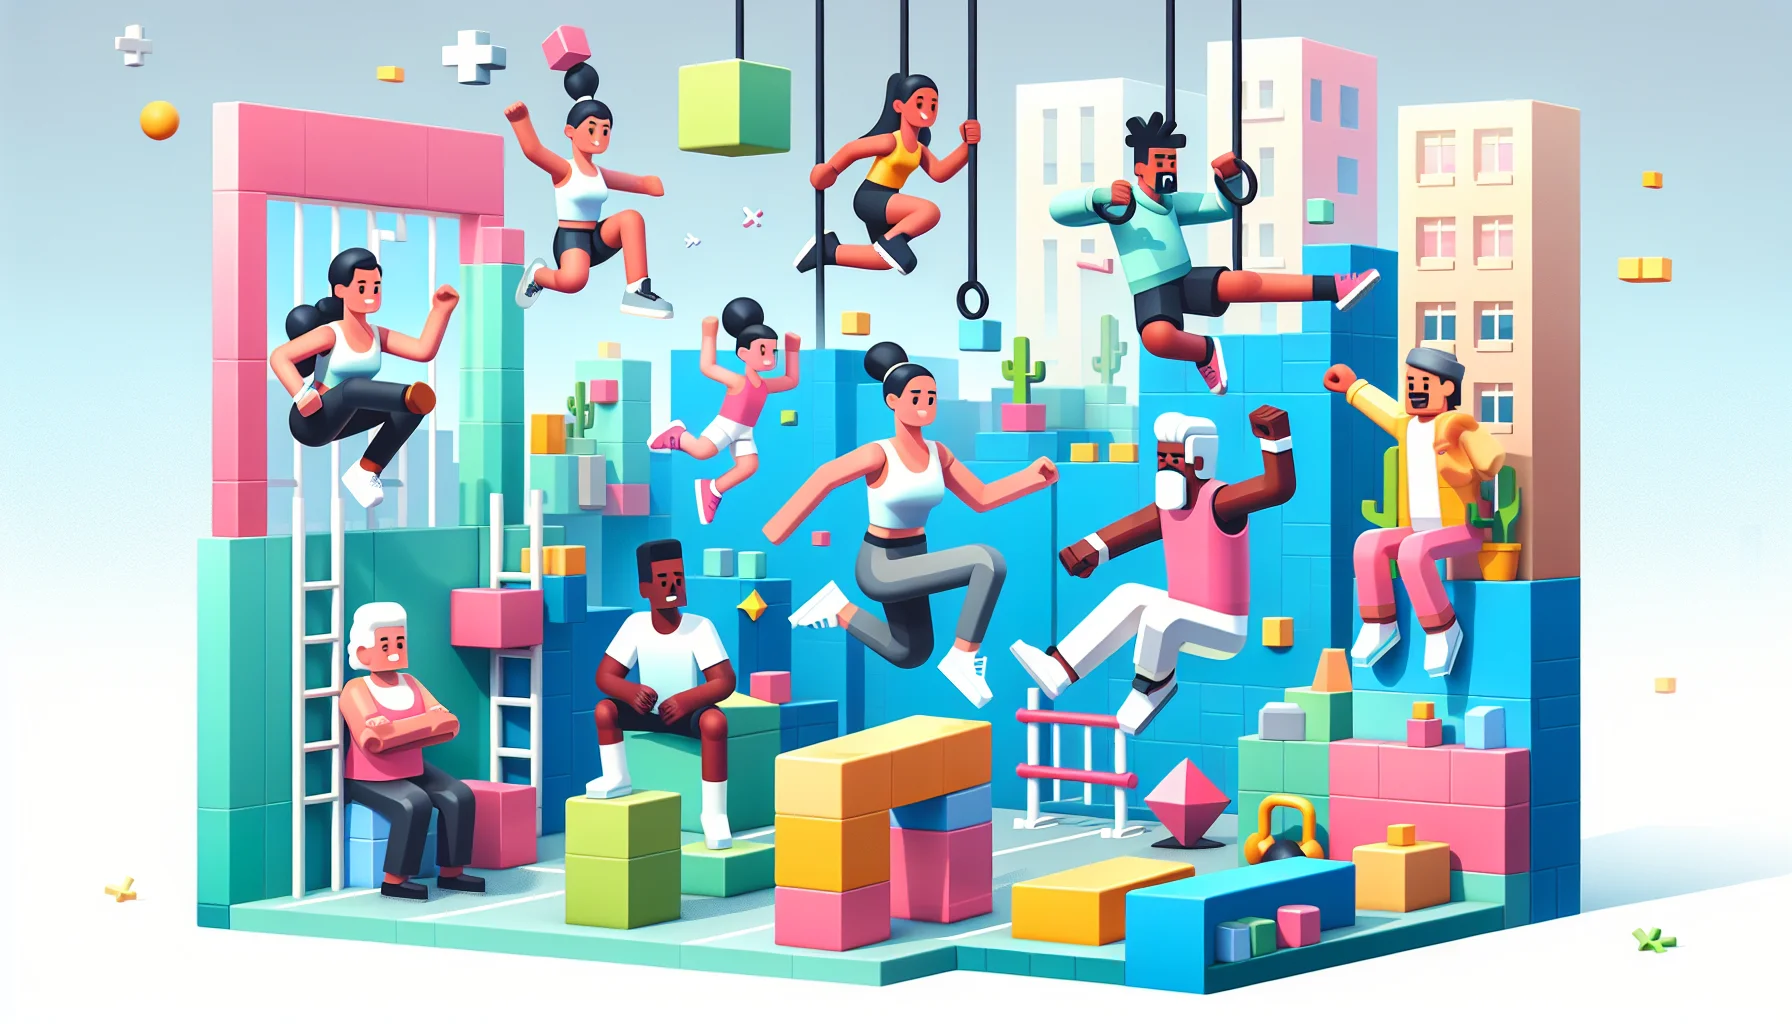 Create a light-hearted and enticing image depicting an imaginative parkour scene set inside a block-style virtual environment, similar to popular game-building platforms. Show a diverse assortment of characters including a Caucasian woman, Black man, Hispanic child and South Asian senior all performing parkour stunts. Their poses should be humorous yet also display their athletic abilities. Include various exercise equipment and indications of movement for dynamic effect. Have a backdrop of lively, pastel-colored building blocks forming various obstacles. The aim is to convey an upbeat, encouraging message towards physical activity in a fun, game-like manner.